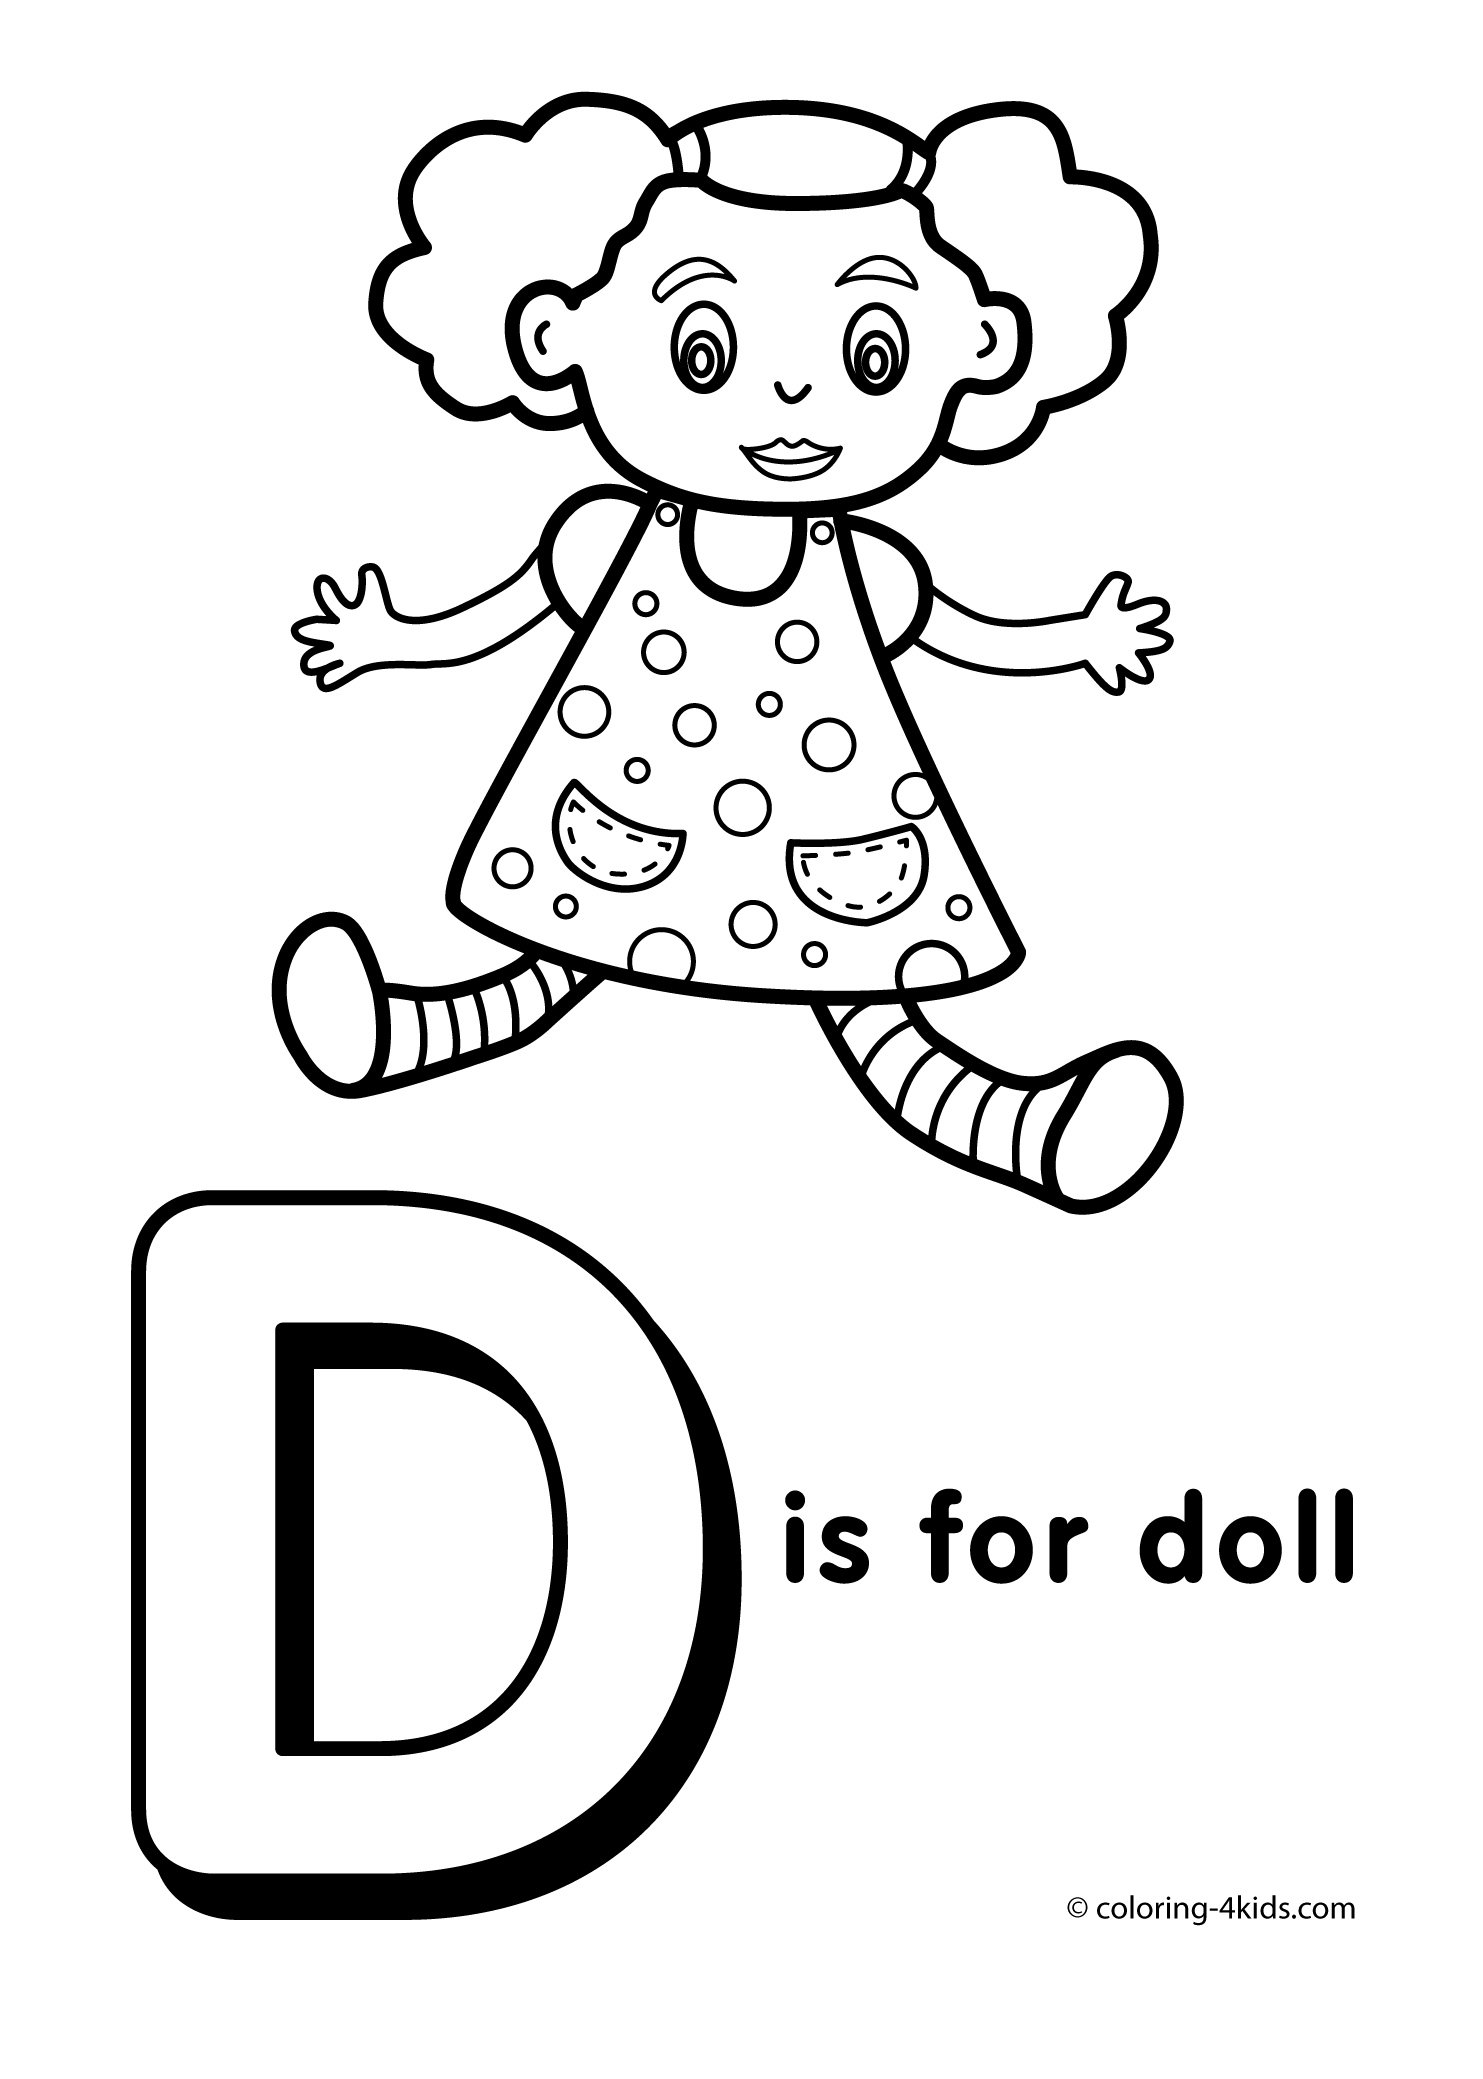 Letter d coloring pages to download and print for free